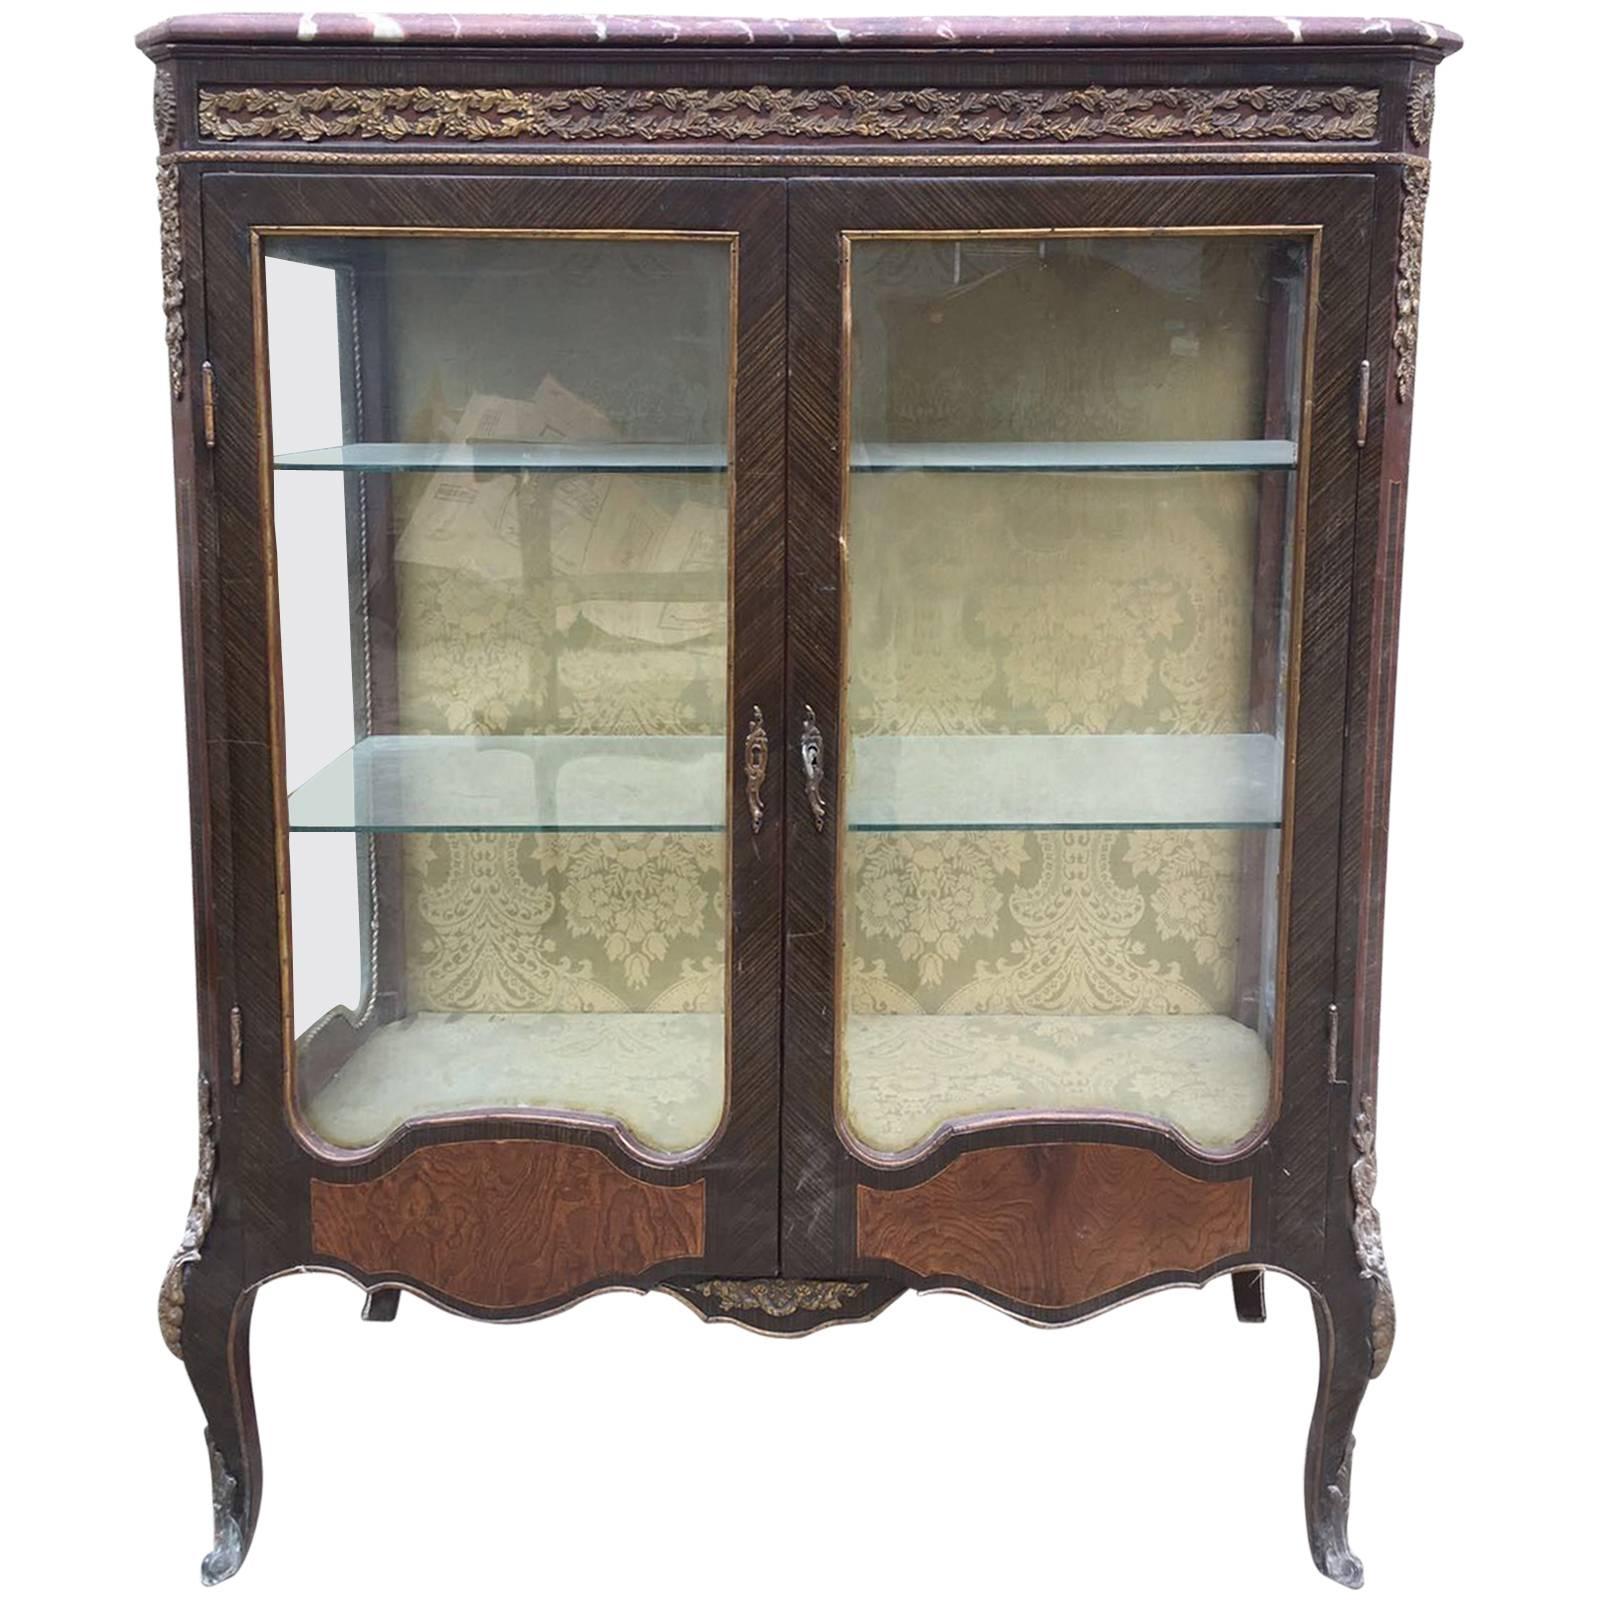 Rare Antique  French Inlaid  Shop Display Case, Haberdashery For Sale